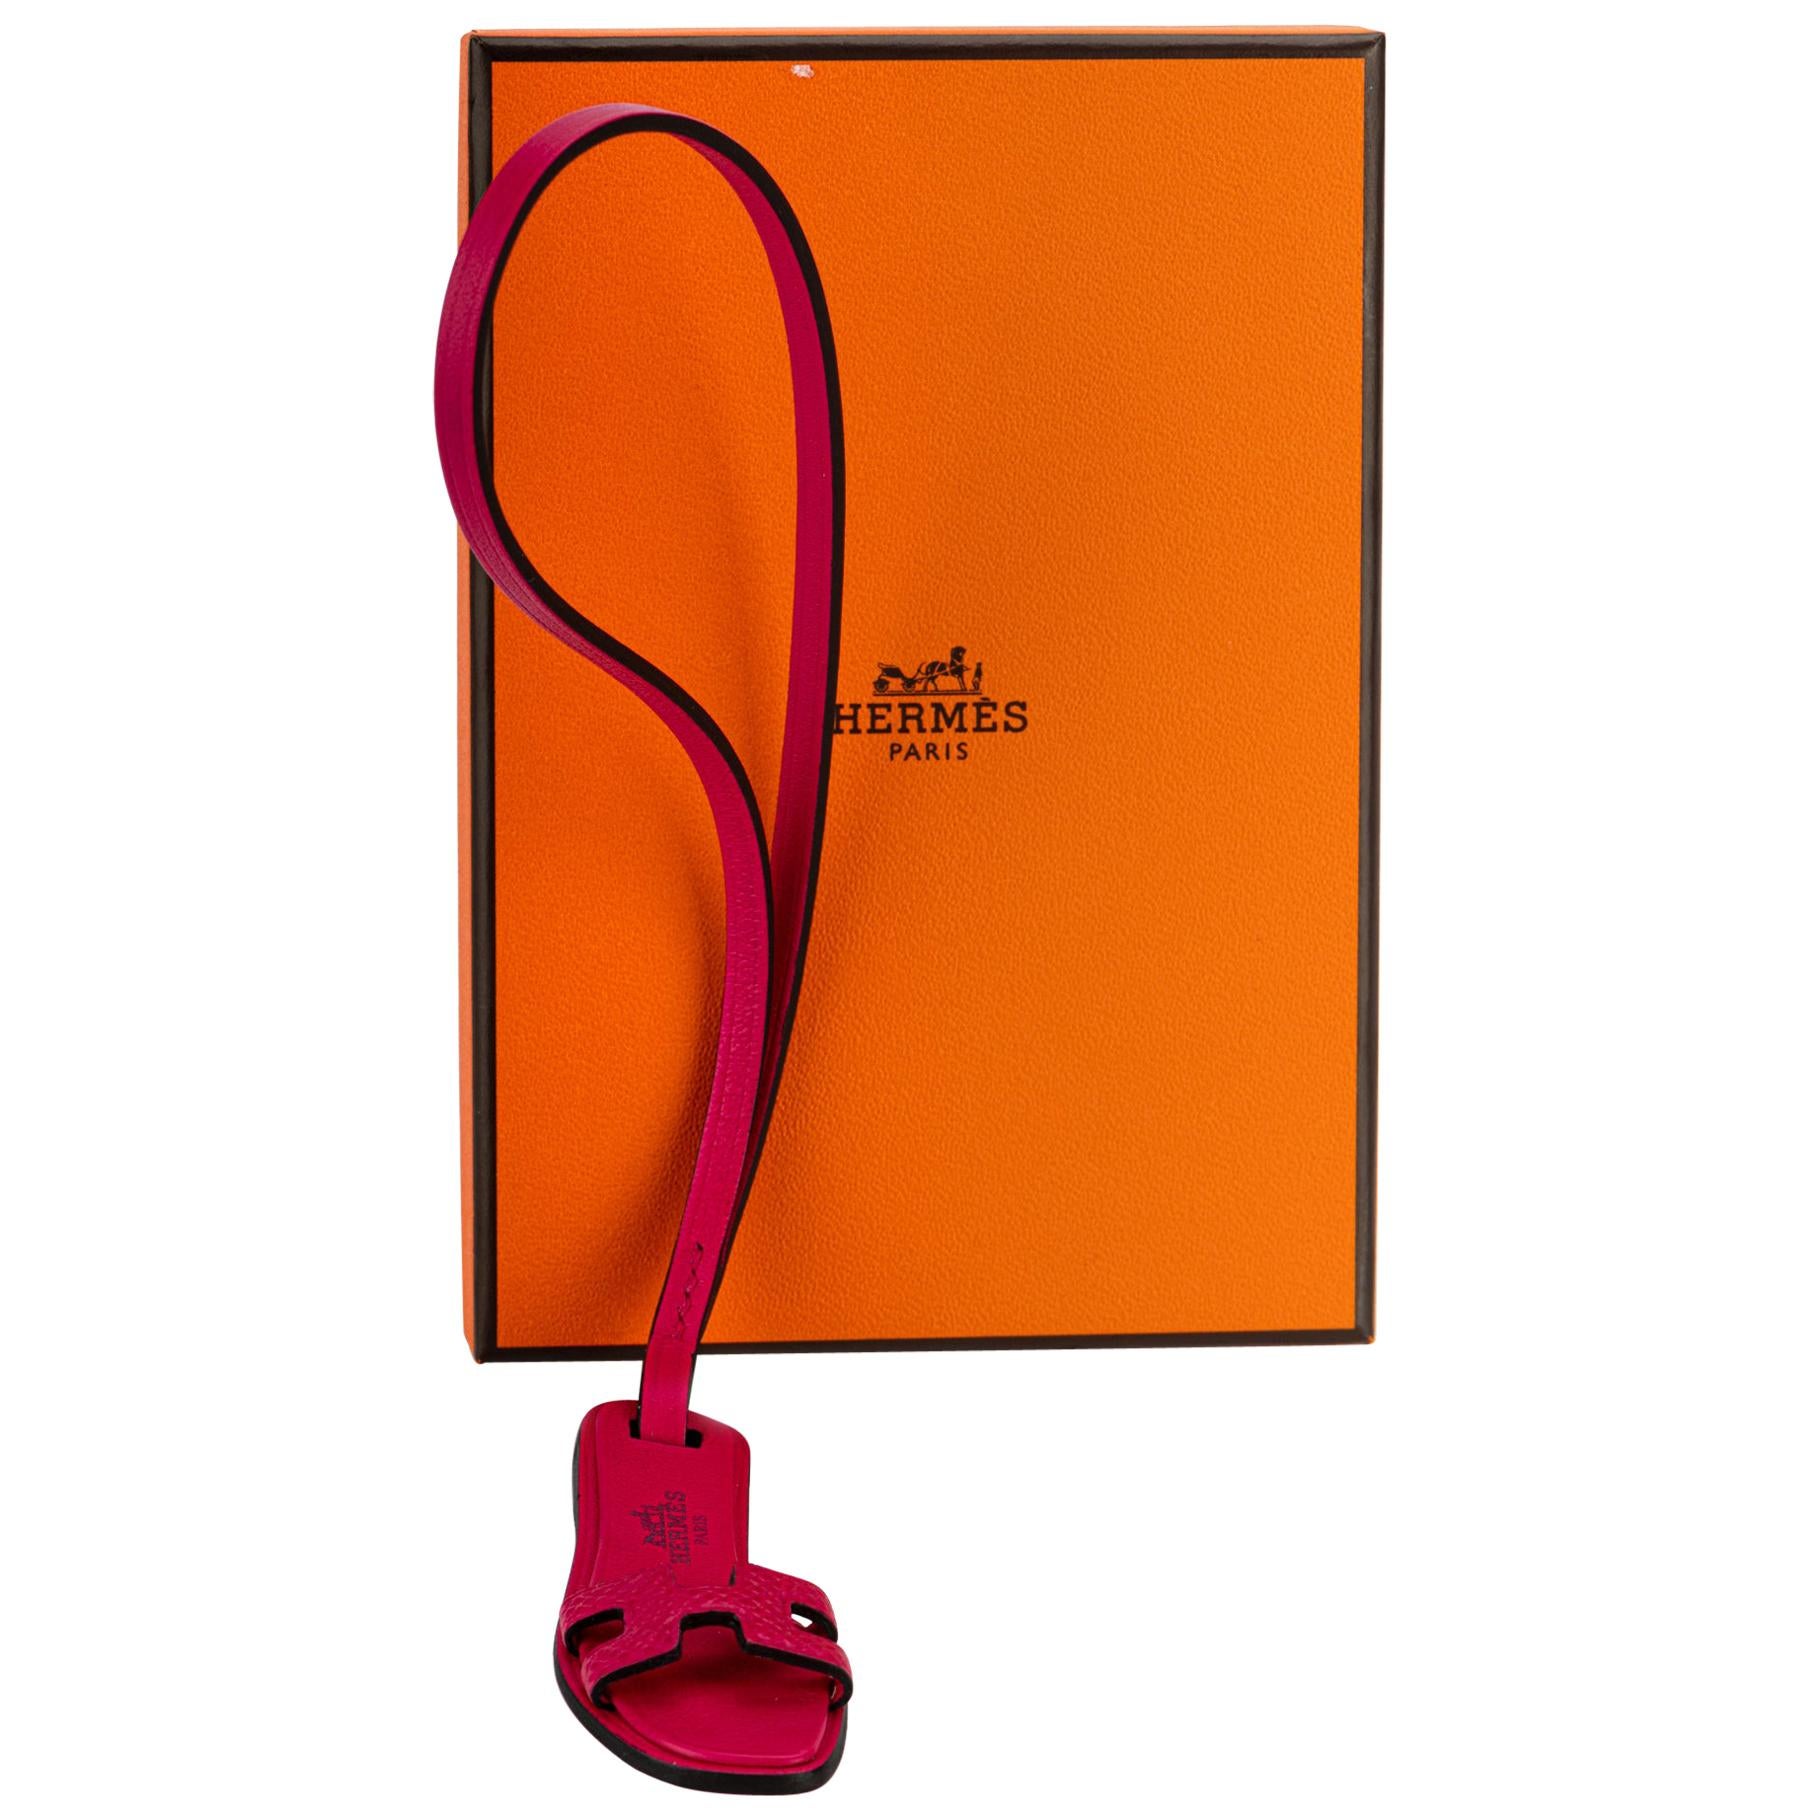 New in Box Hermes Rare Oran Pink Bag Charm For Sale